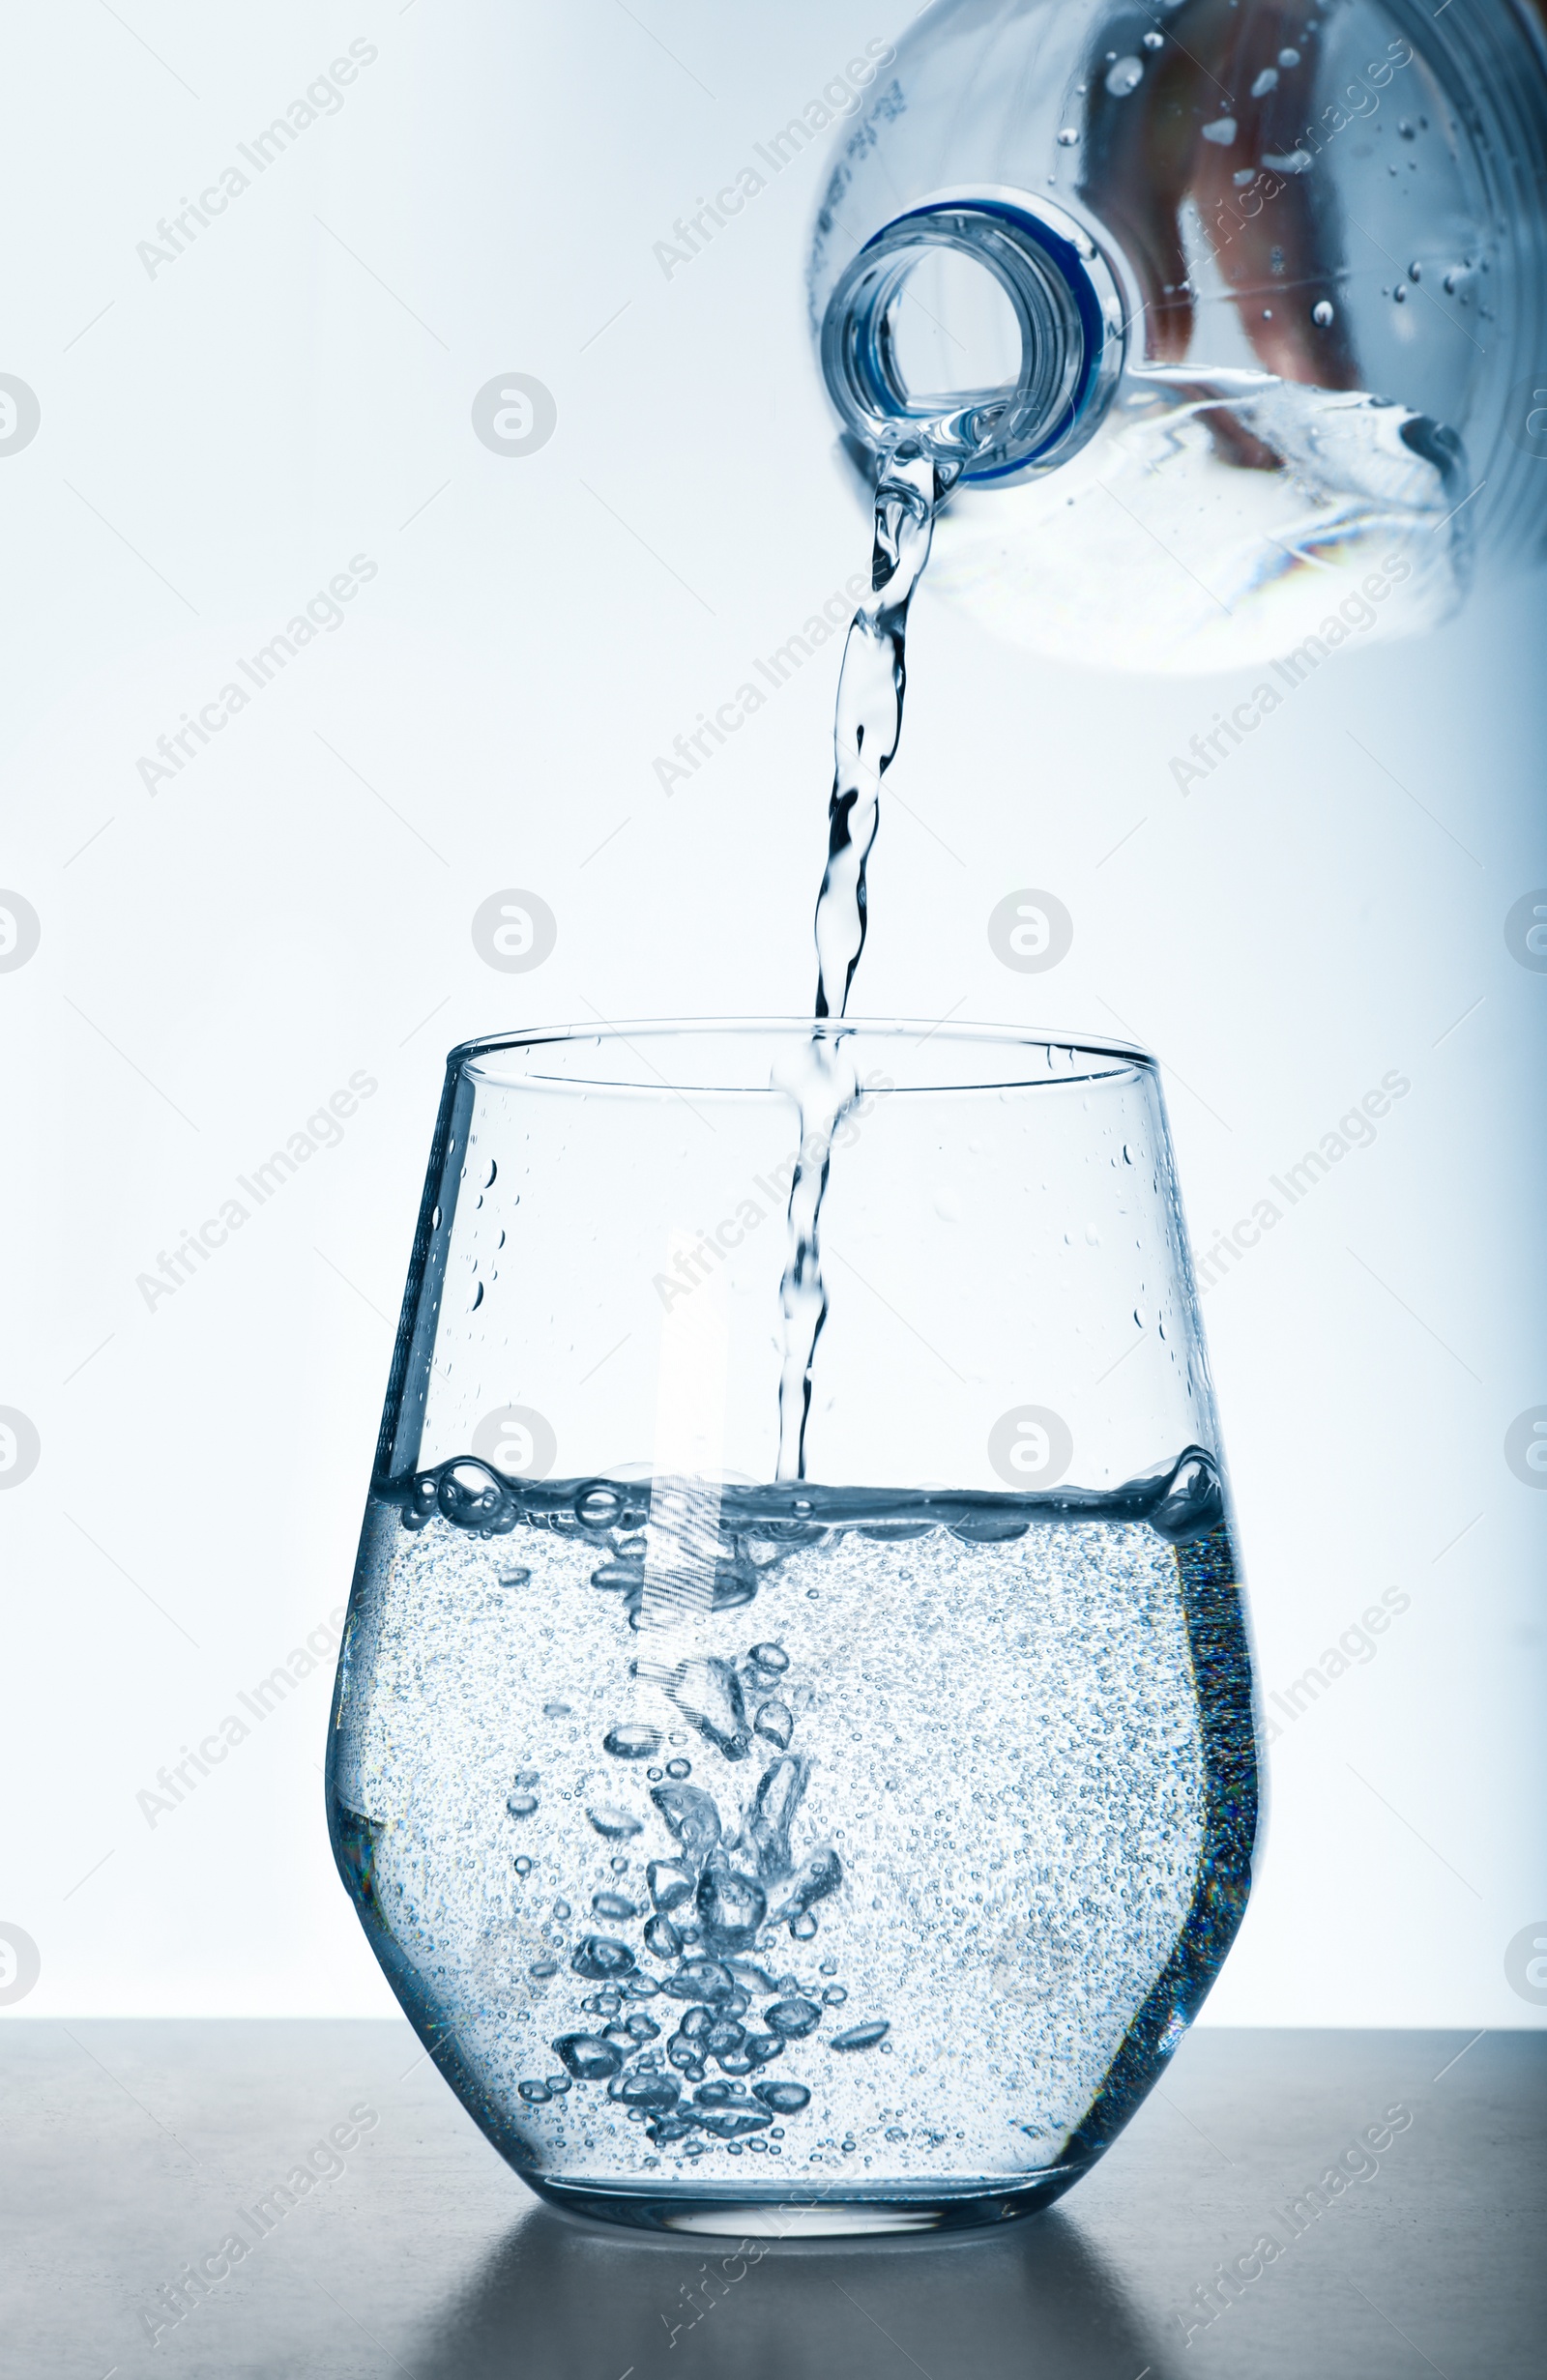 Photo of Pouring water from bottle into glass against grey background. Refreshing drink